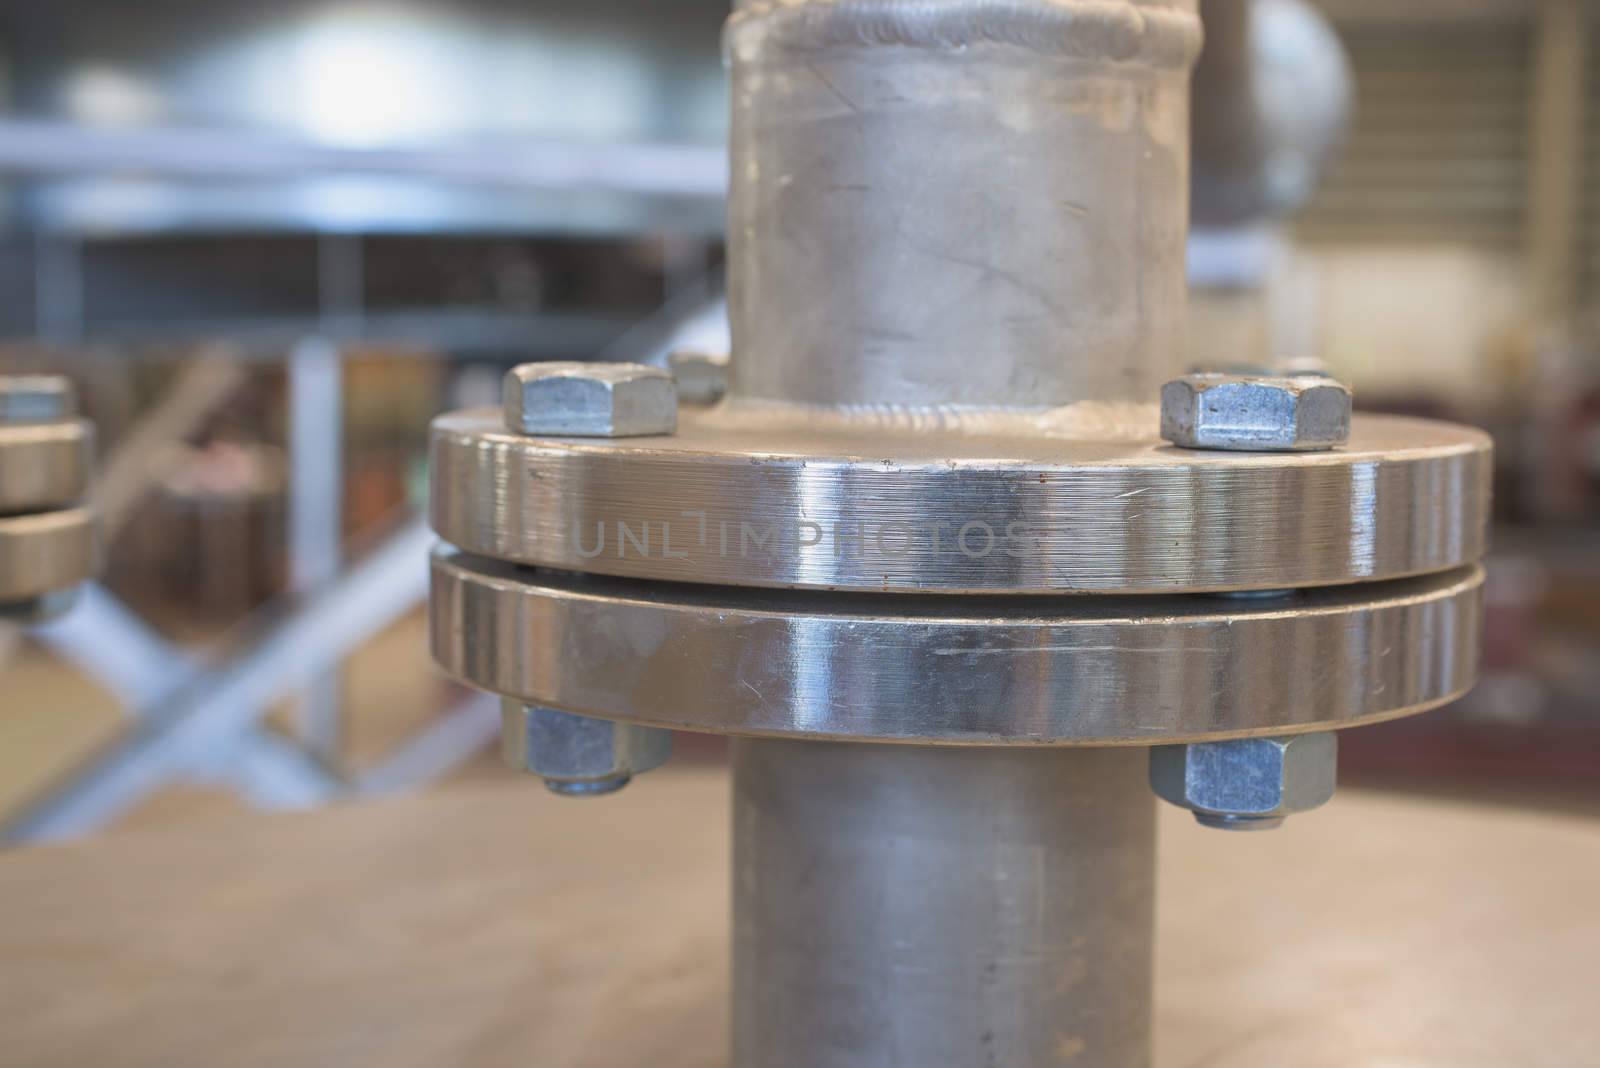 Stainless steel flange. Very shallow depth of field with only the nearest part of the flange in focus with detailed horisontal lines from the lathe visible.